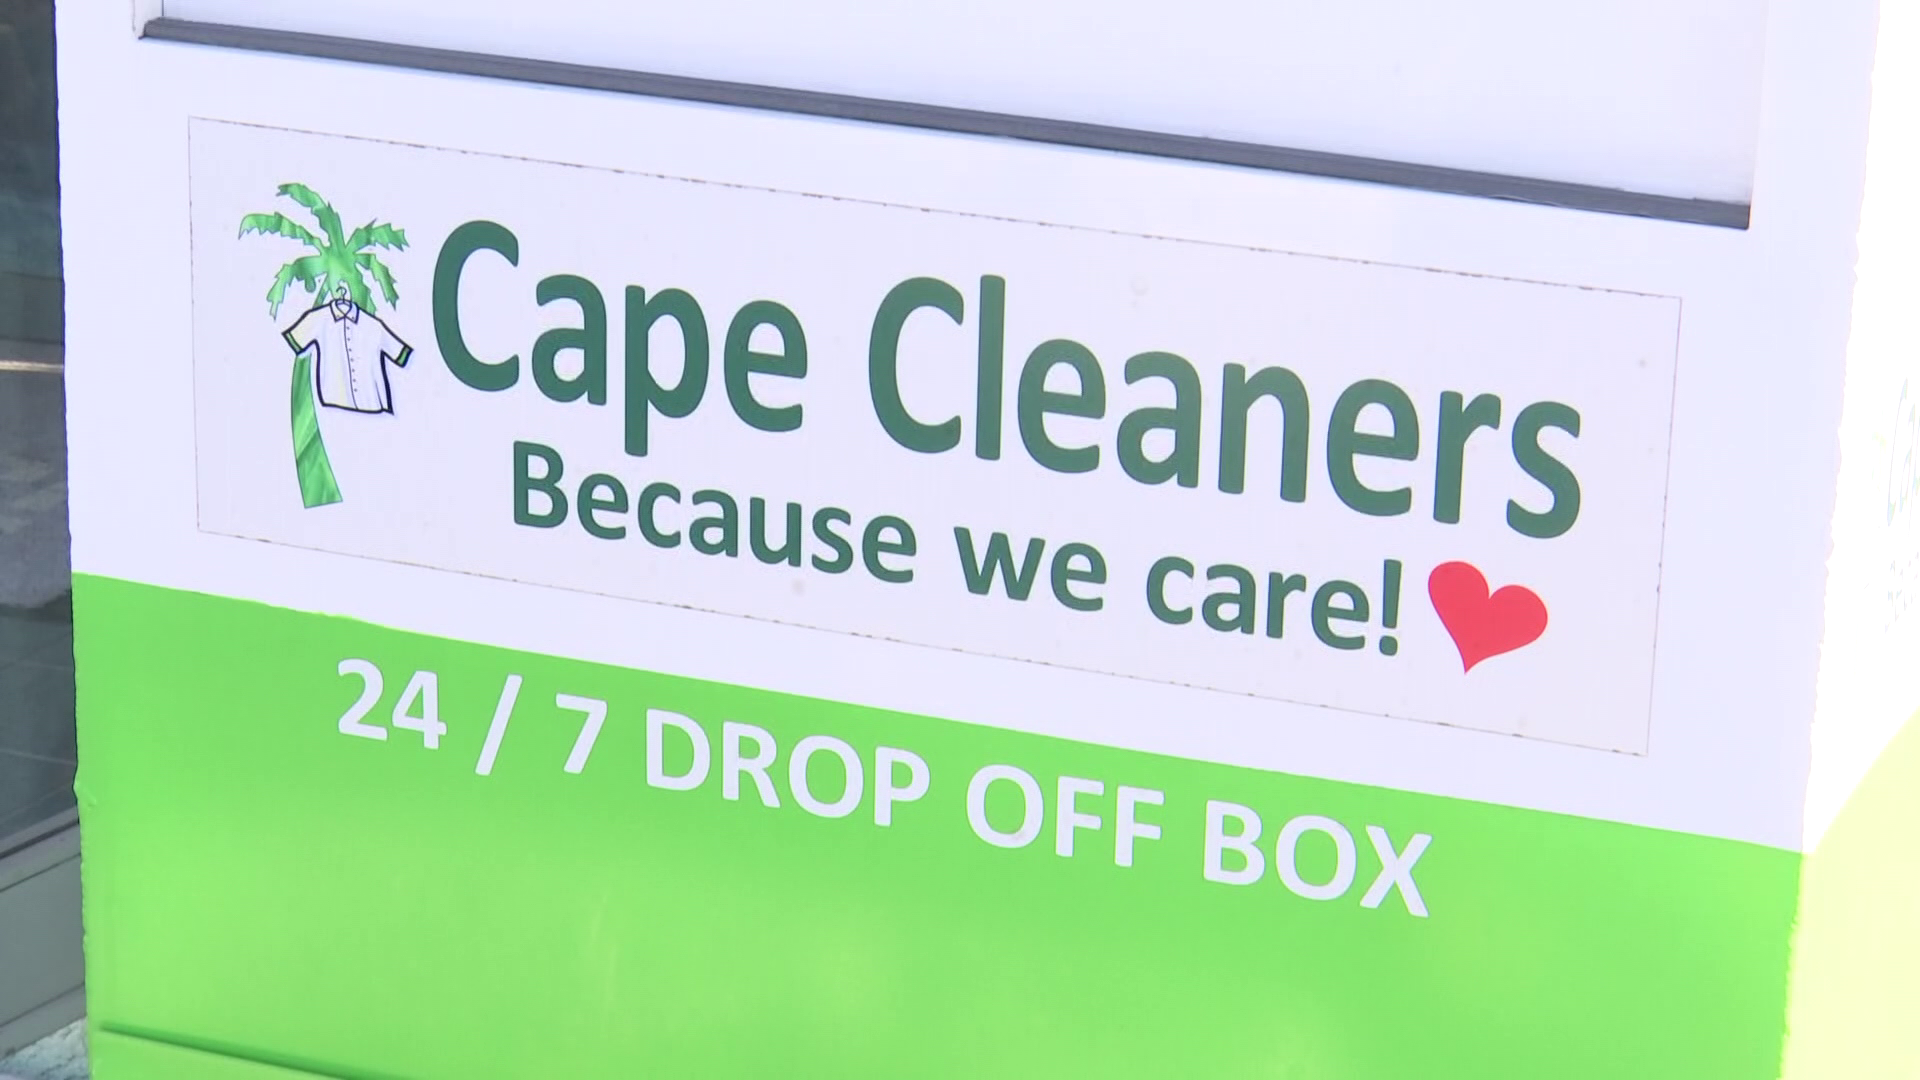 Cape Cleaners